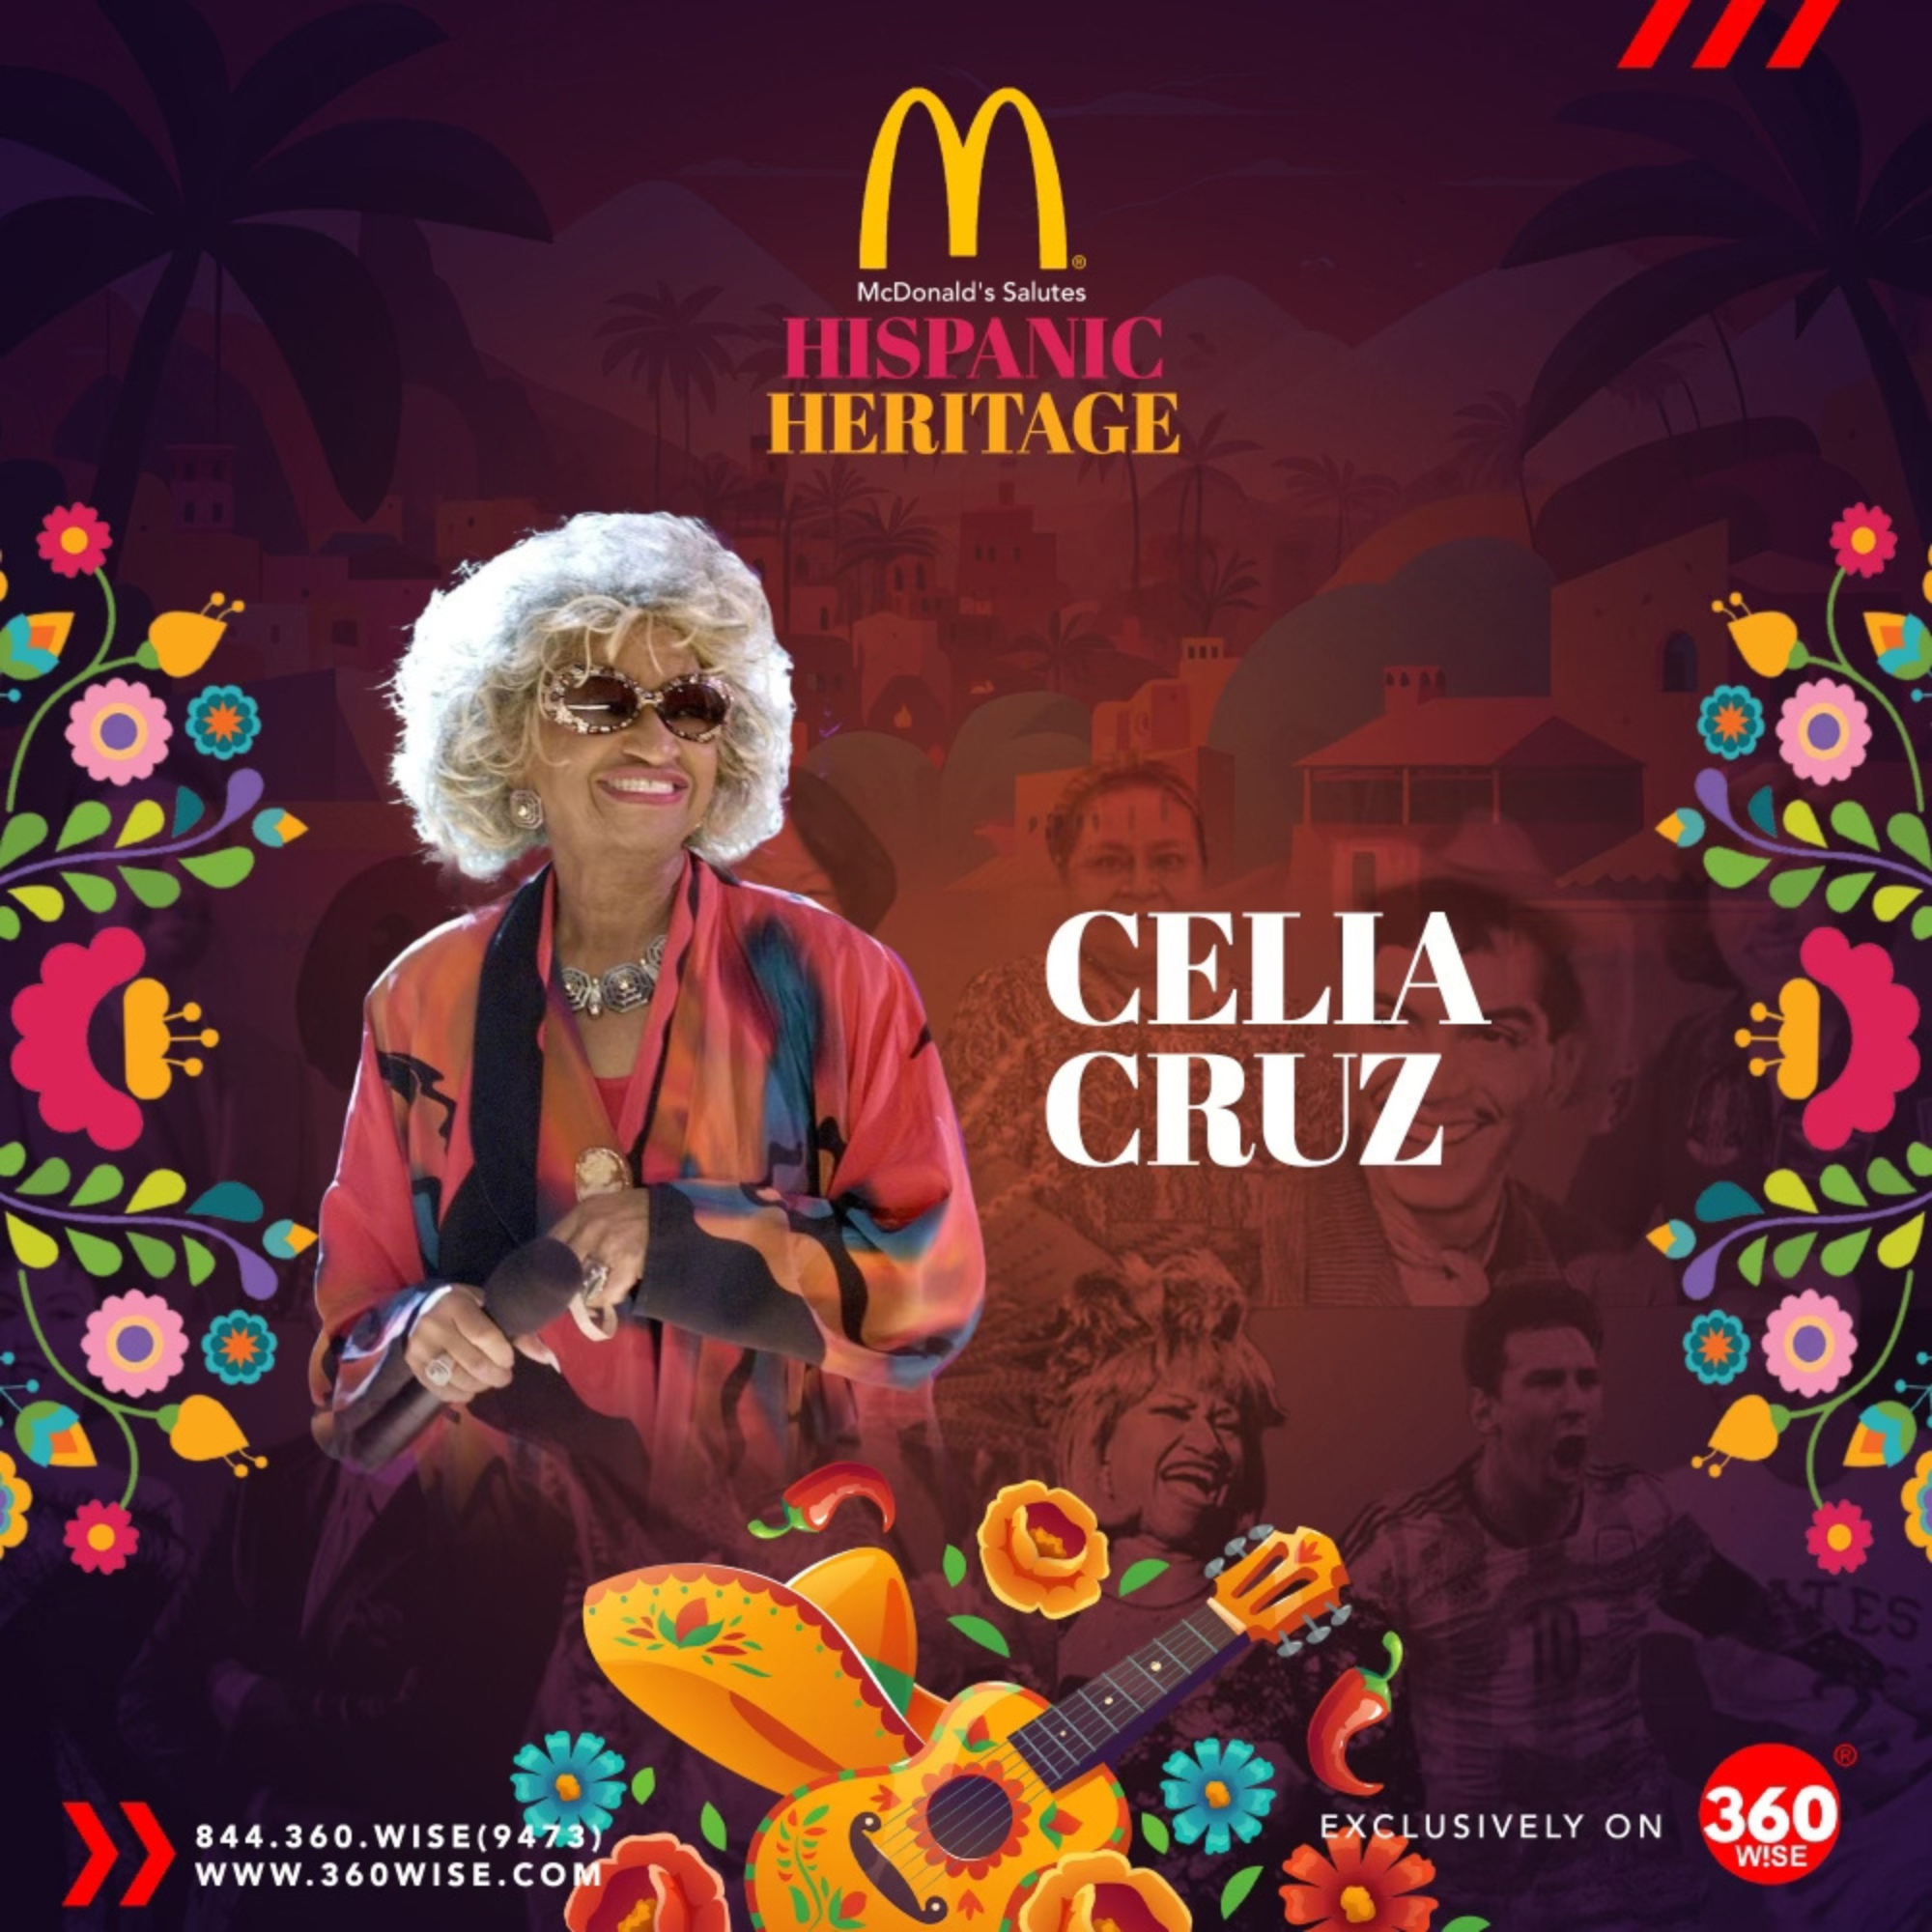 Celia Cruz - Honored by McDonald's Hispanic Heritage Month - powered by 360WiSE